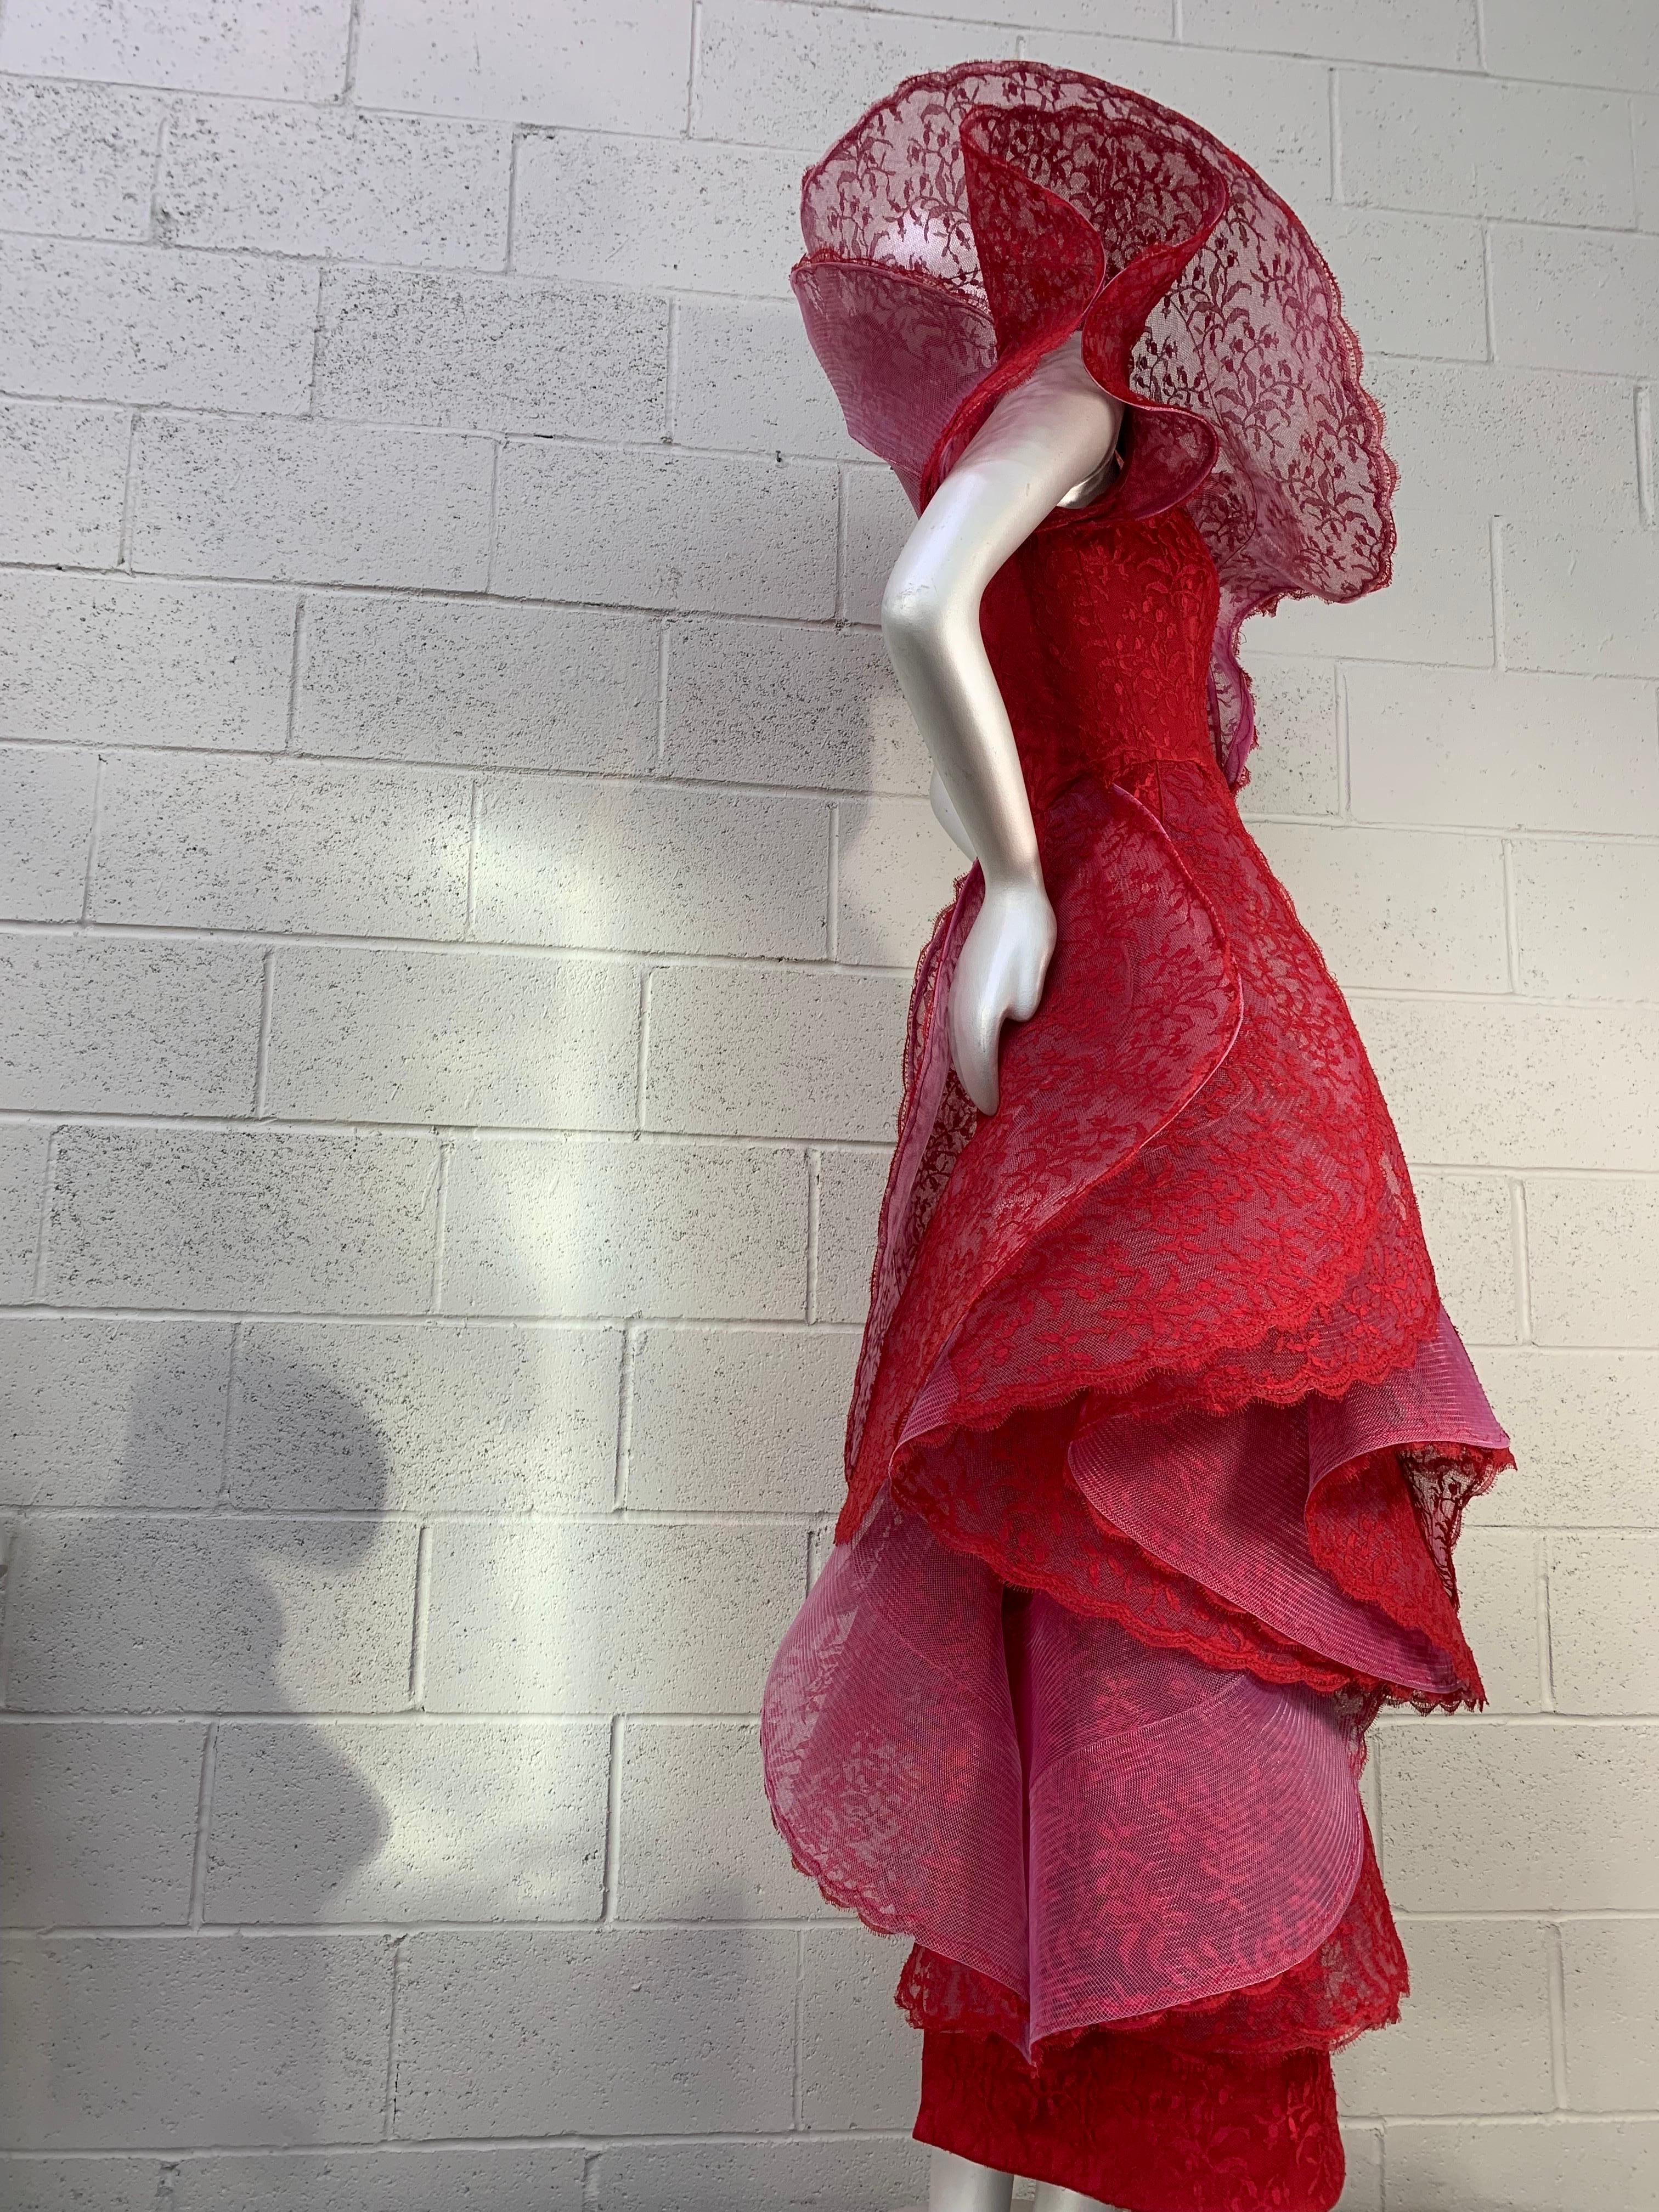 Pierre Cardin Haute Couture Tiered Flounce Lace Dress, 1987:

Haute Couture red lace dress with tiered pink synthetic crinoline flounces around the neckline and cascading down the body, and center back zipper closure.

Known primarily for his